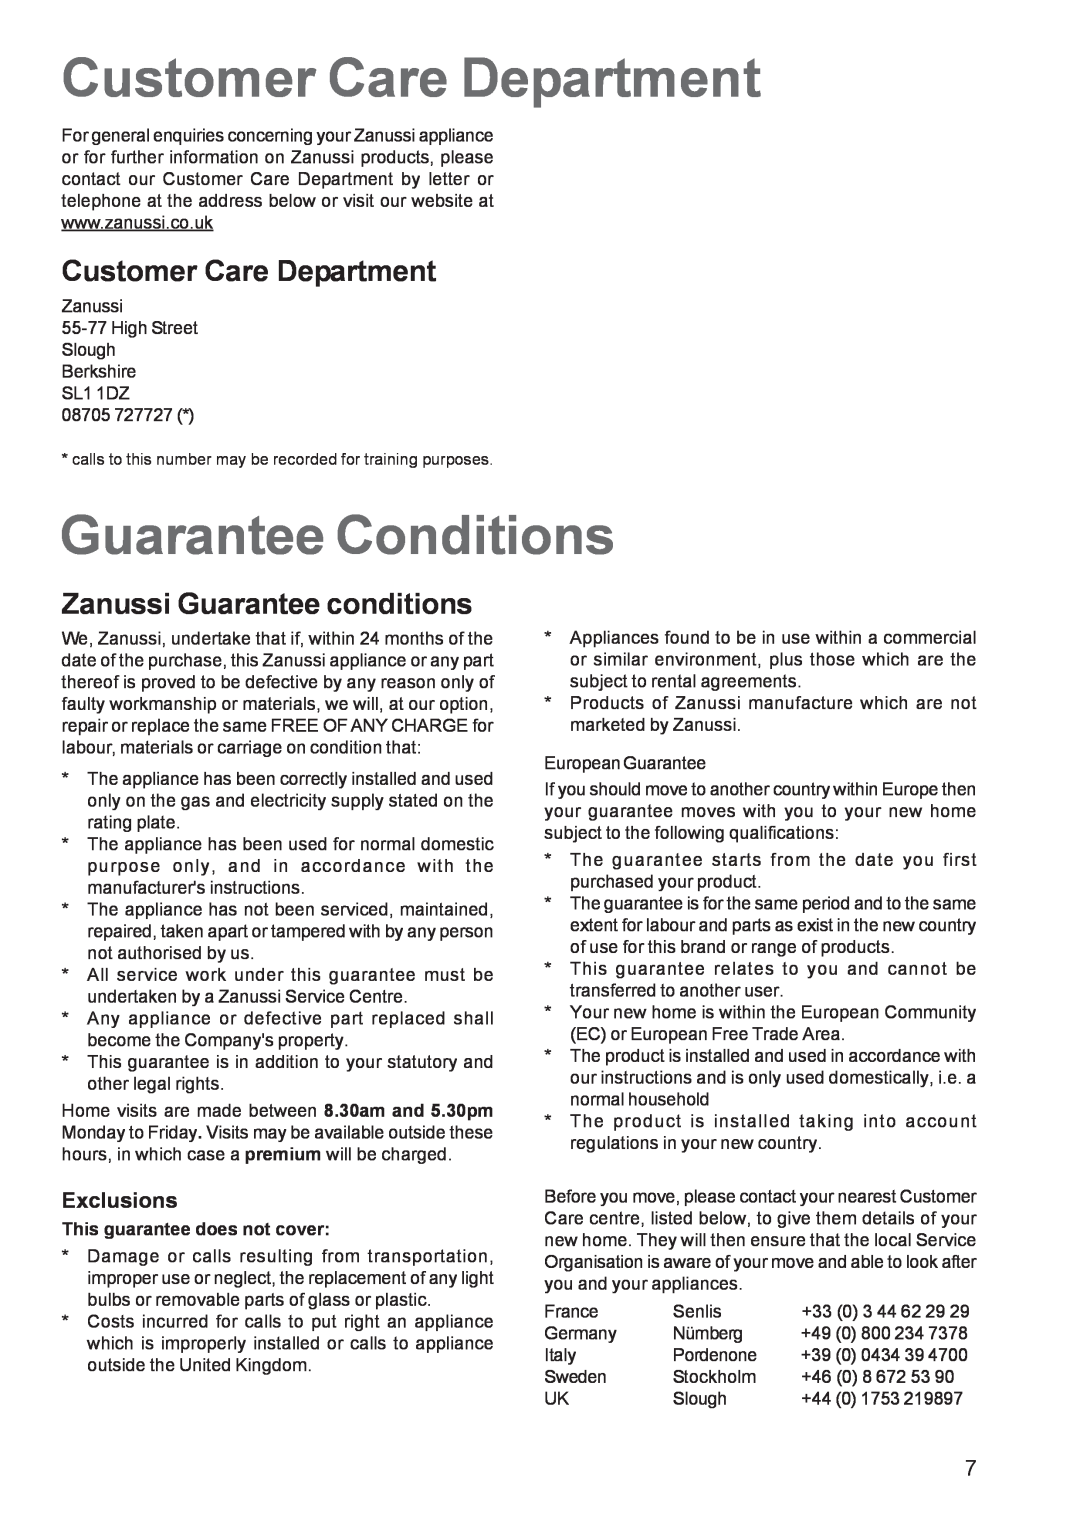 Zanussi ZGF 682, ZGF 692 manual Customer Care Department, Guarantee Conditions, Zanussi Guarantee conditions, Exclusions 